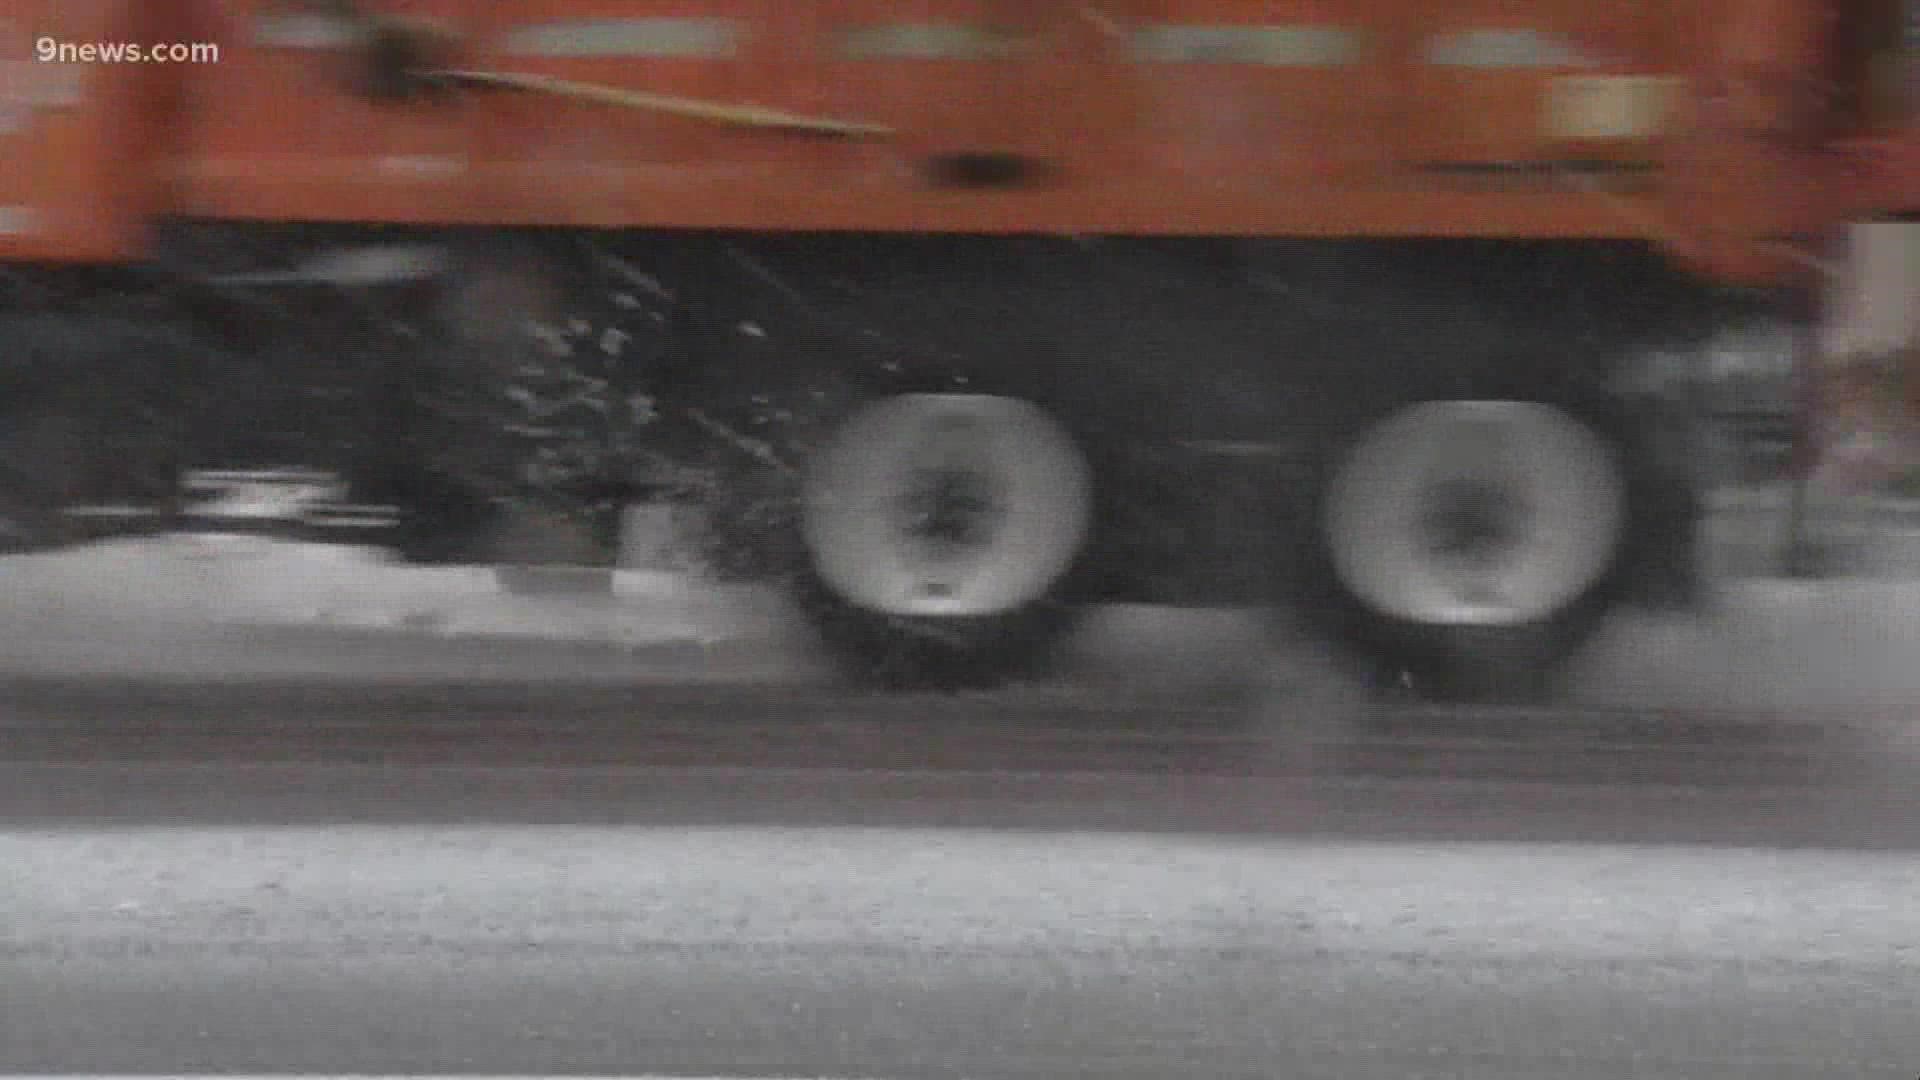 CDOT and meteorologist Cory Reppenhagen have more on the preparations and what to expect with tomorrow's snowy morning drive.